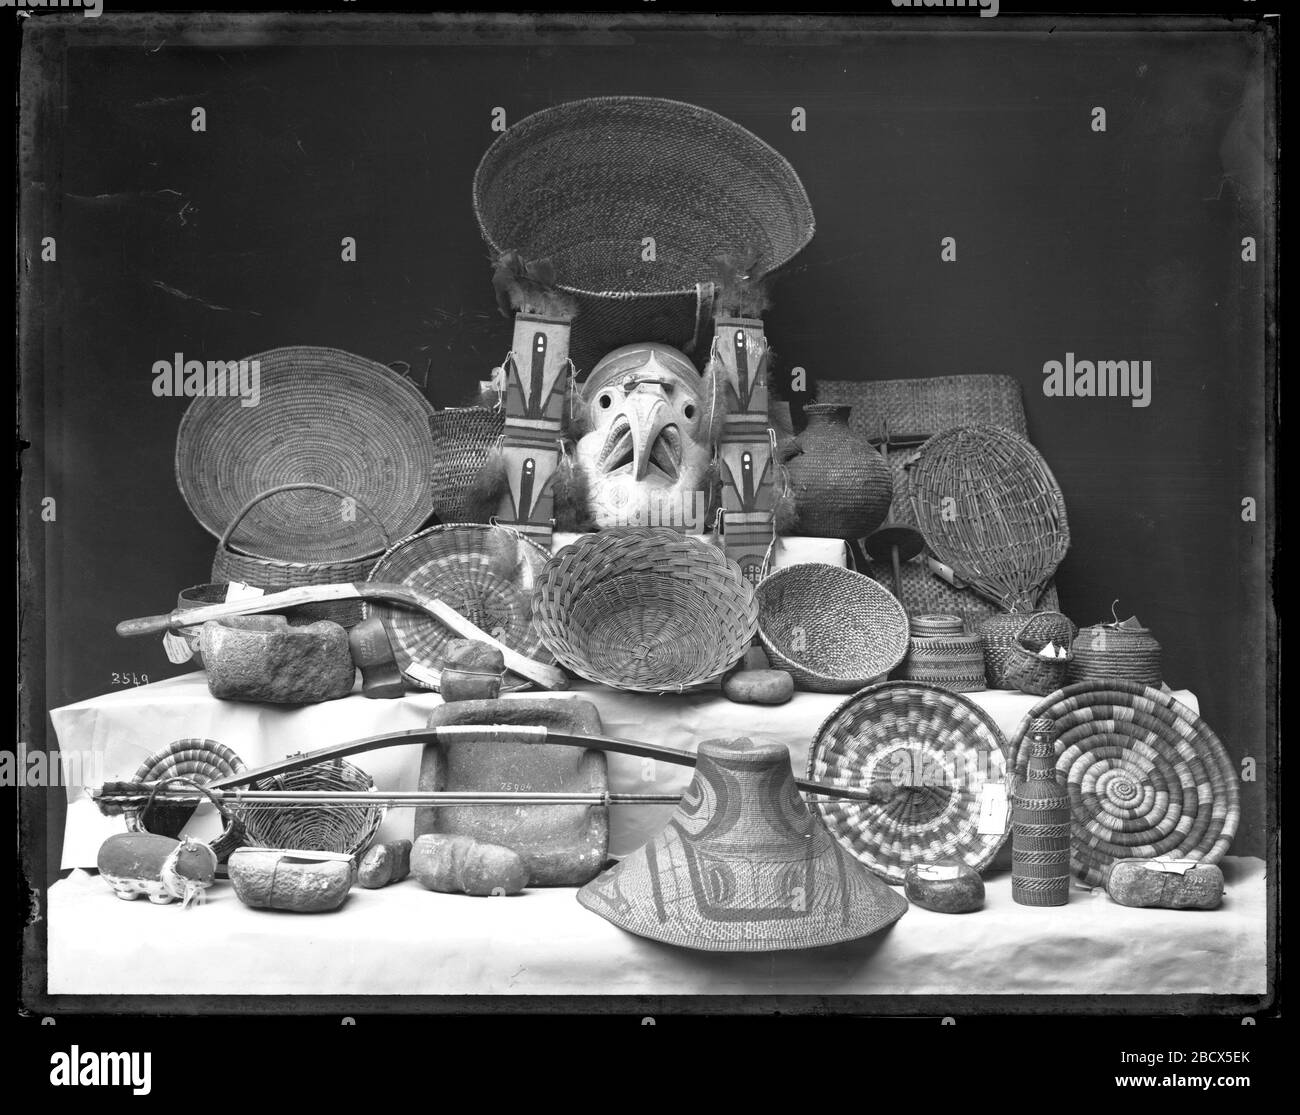 Zuni Artifacts. Baskets, bow, stone tools and containers.Smithsonian Institution Archives, Acc. 11-007, Box 015, Image No. MNH-3549Smithsonian Institution Archives Capital Gallery, Suite 3000, MRC 507; 600 Maryland Avenue, SW; Washington, DC 20024-2520 MNH-3549 Stock Photo